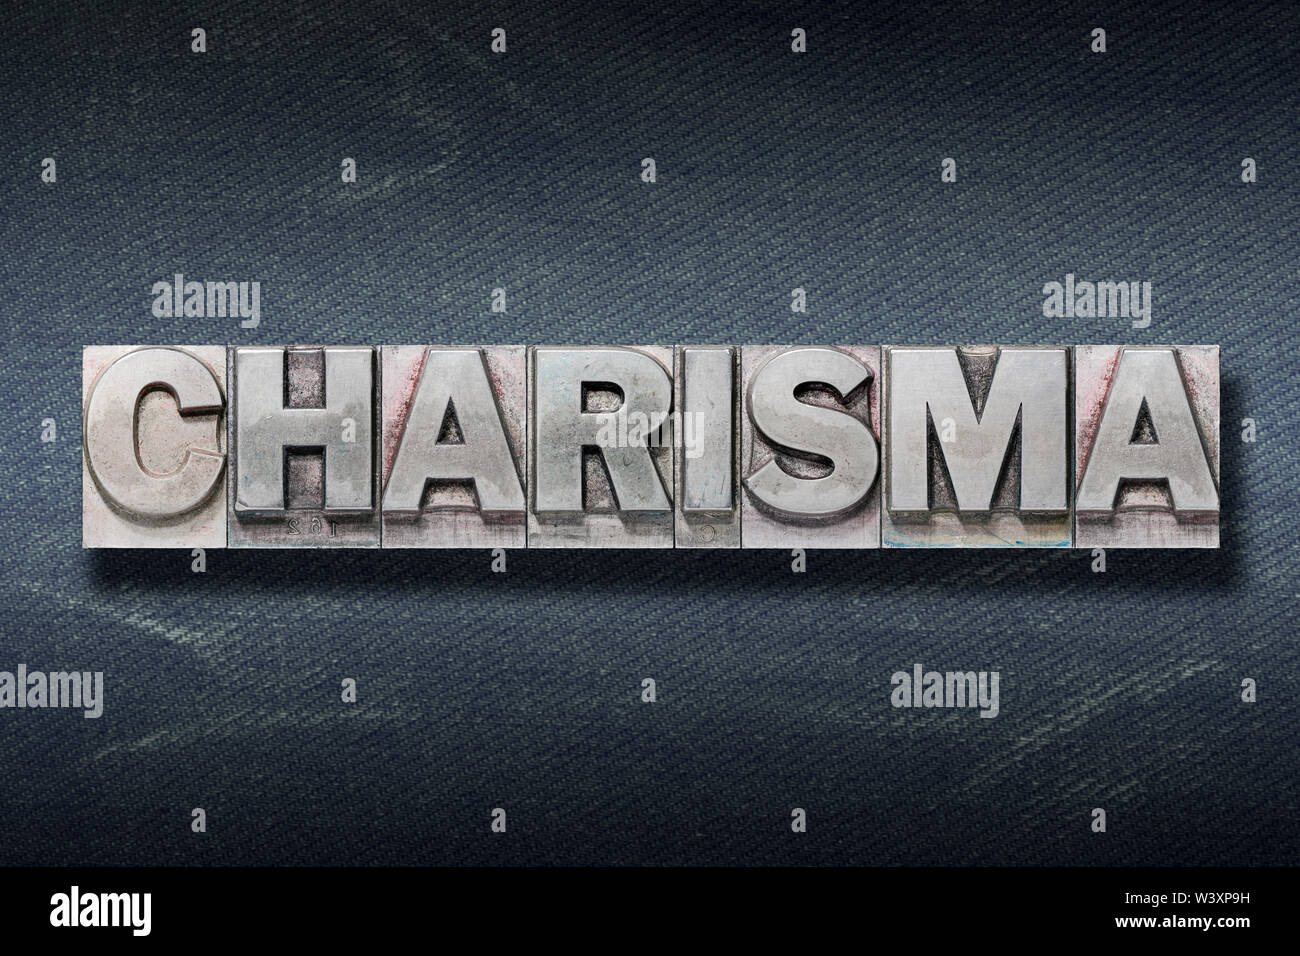 charisma word made from metallic letterpress on dark jeans background Stock Photo